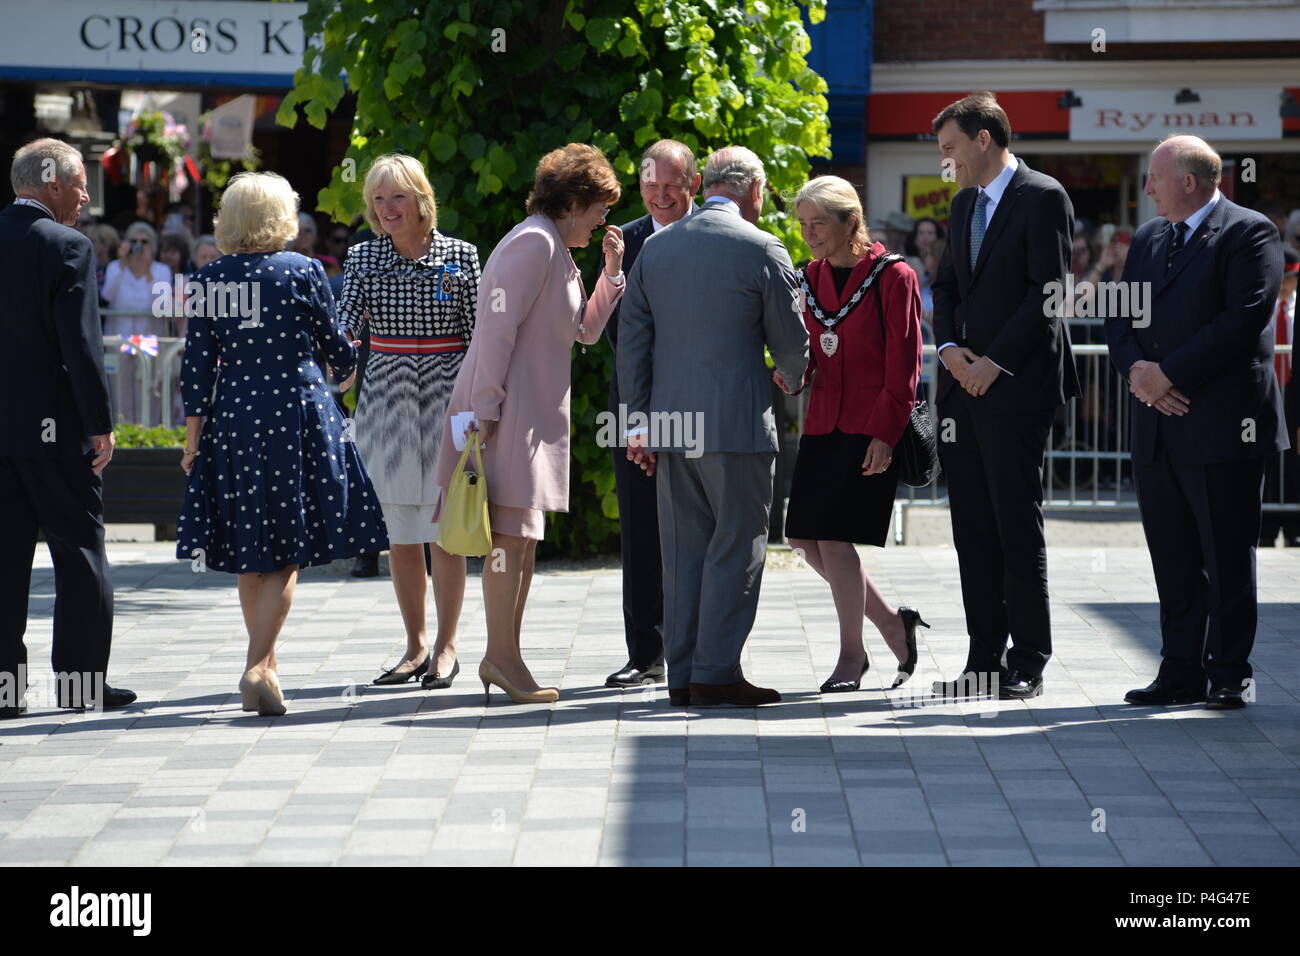 Salisbury, Wiltshire, UK, 22nd June 2018. HRH Prince Charles, the Prince of Wales and Camilla, Duchess of Cornwall meeting local dignitaries in the Market Square. The royal couple are on a visit to Salisbury to support the city’s recovery where visitor numbers have fallen and businesses suffered after the nerve agent attack on former Russian spy Sergei Skripal and his daughter Yulia on March 4th 2018. Stock Photo